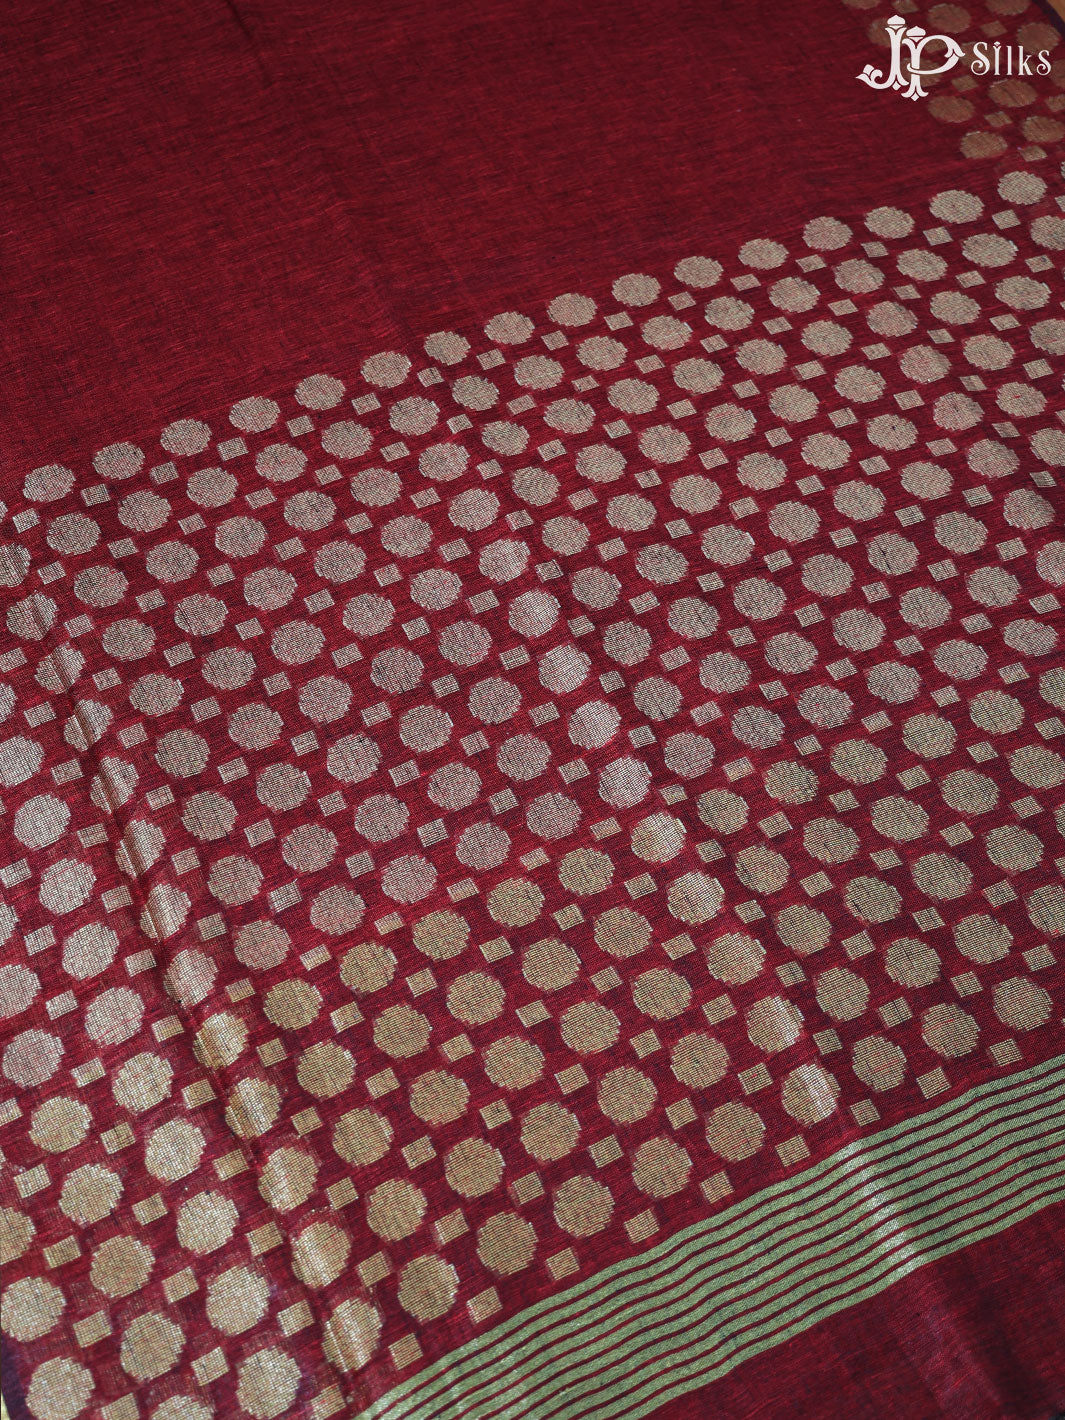 Maroon and Gold Linen Fancy Saree - D8330 - View 3